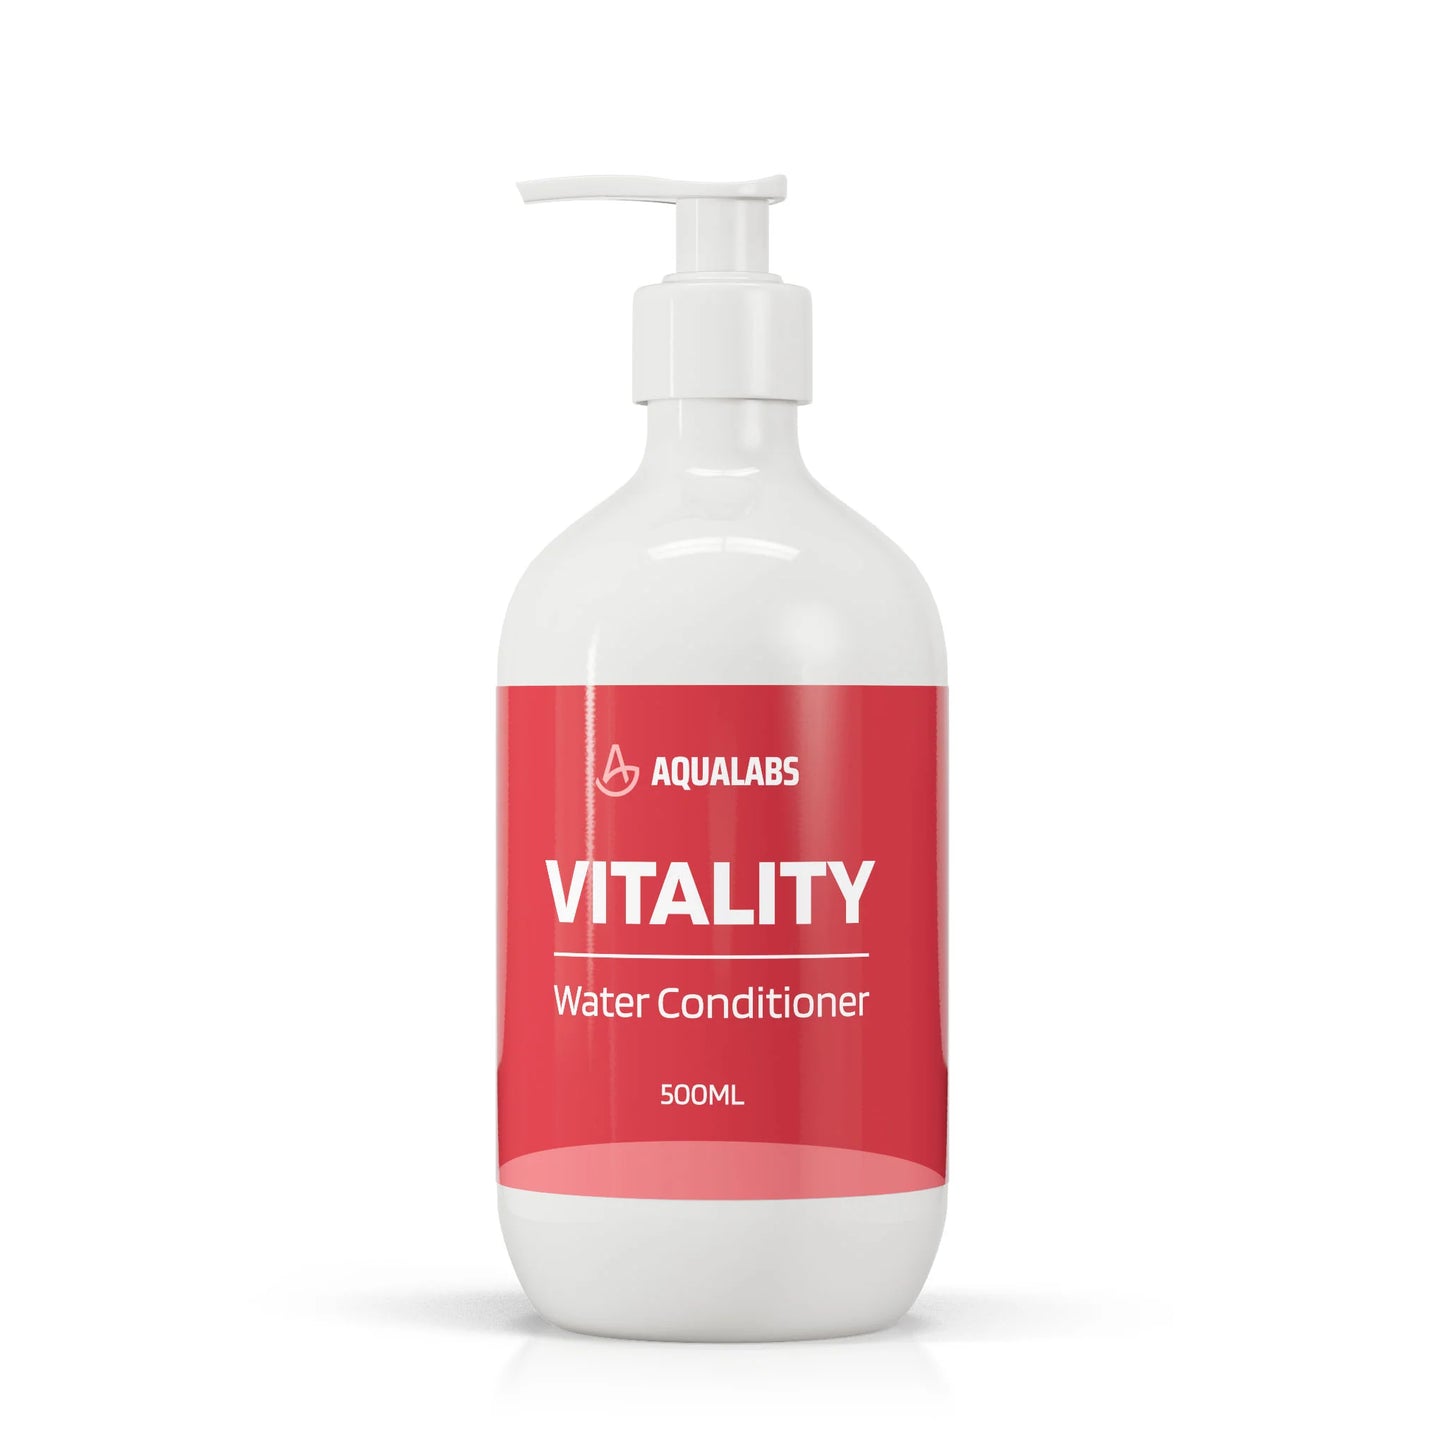 AquaLabs Vitality Water Conditioner